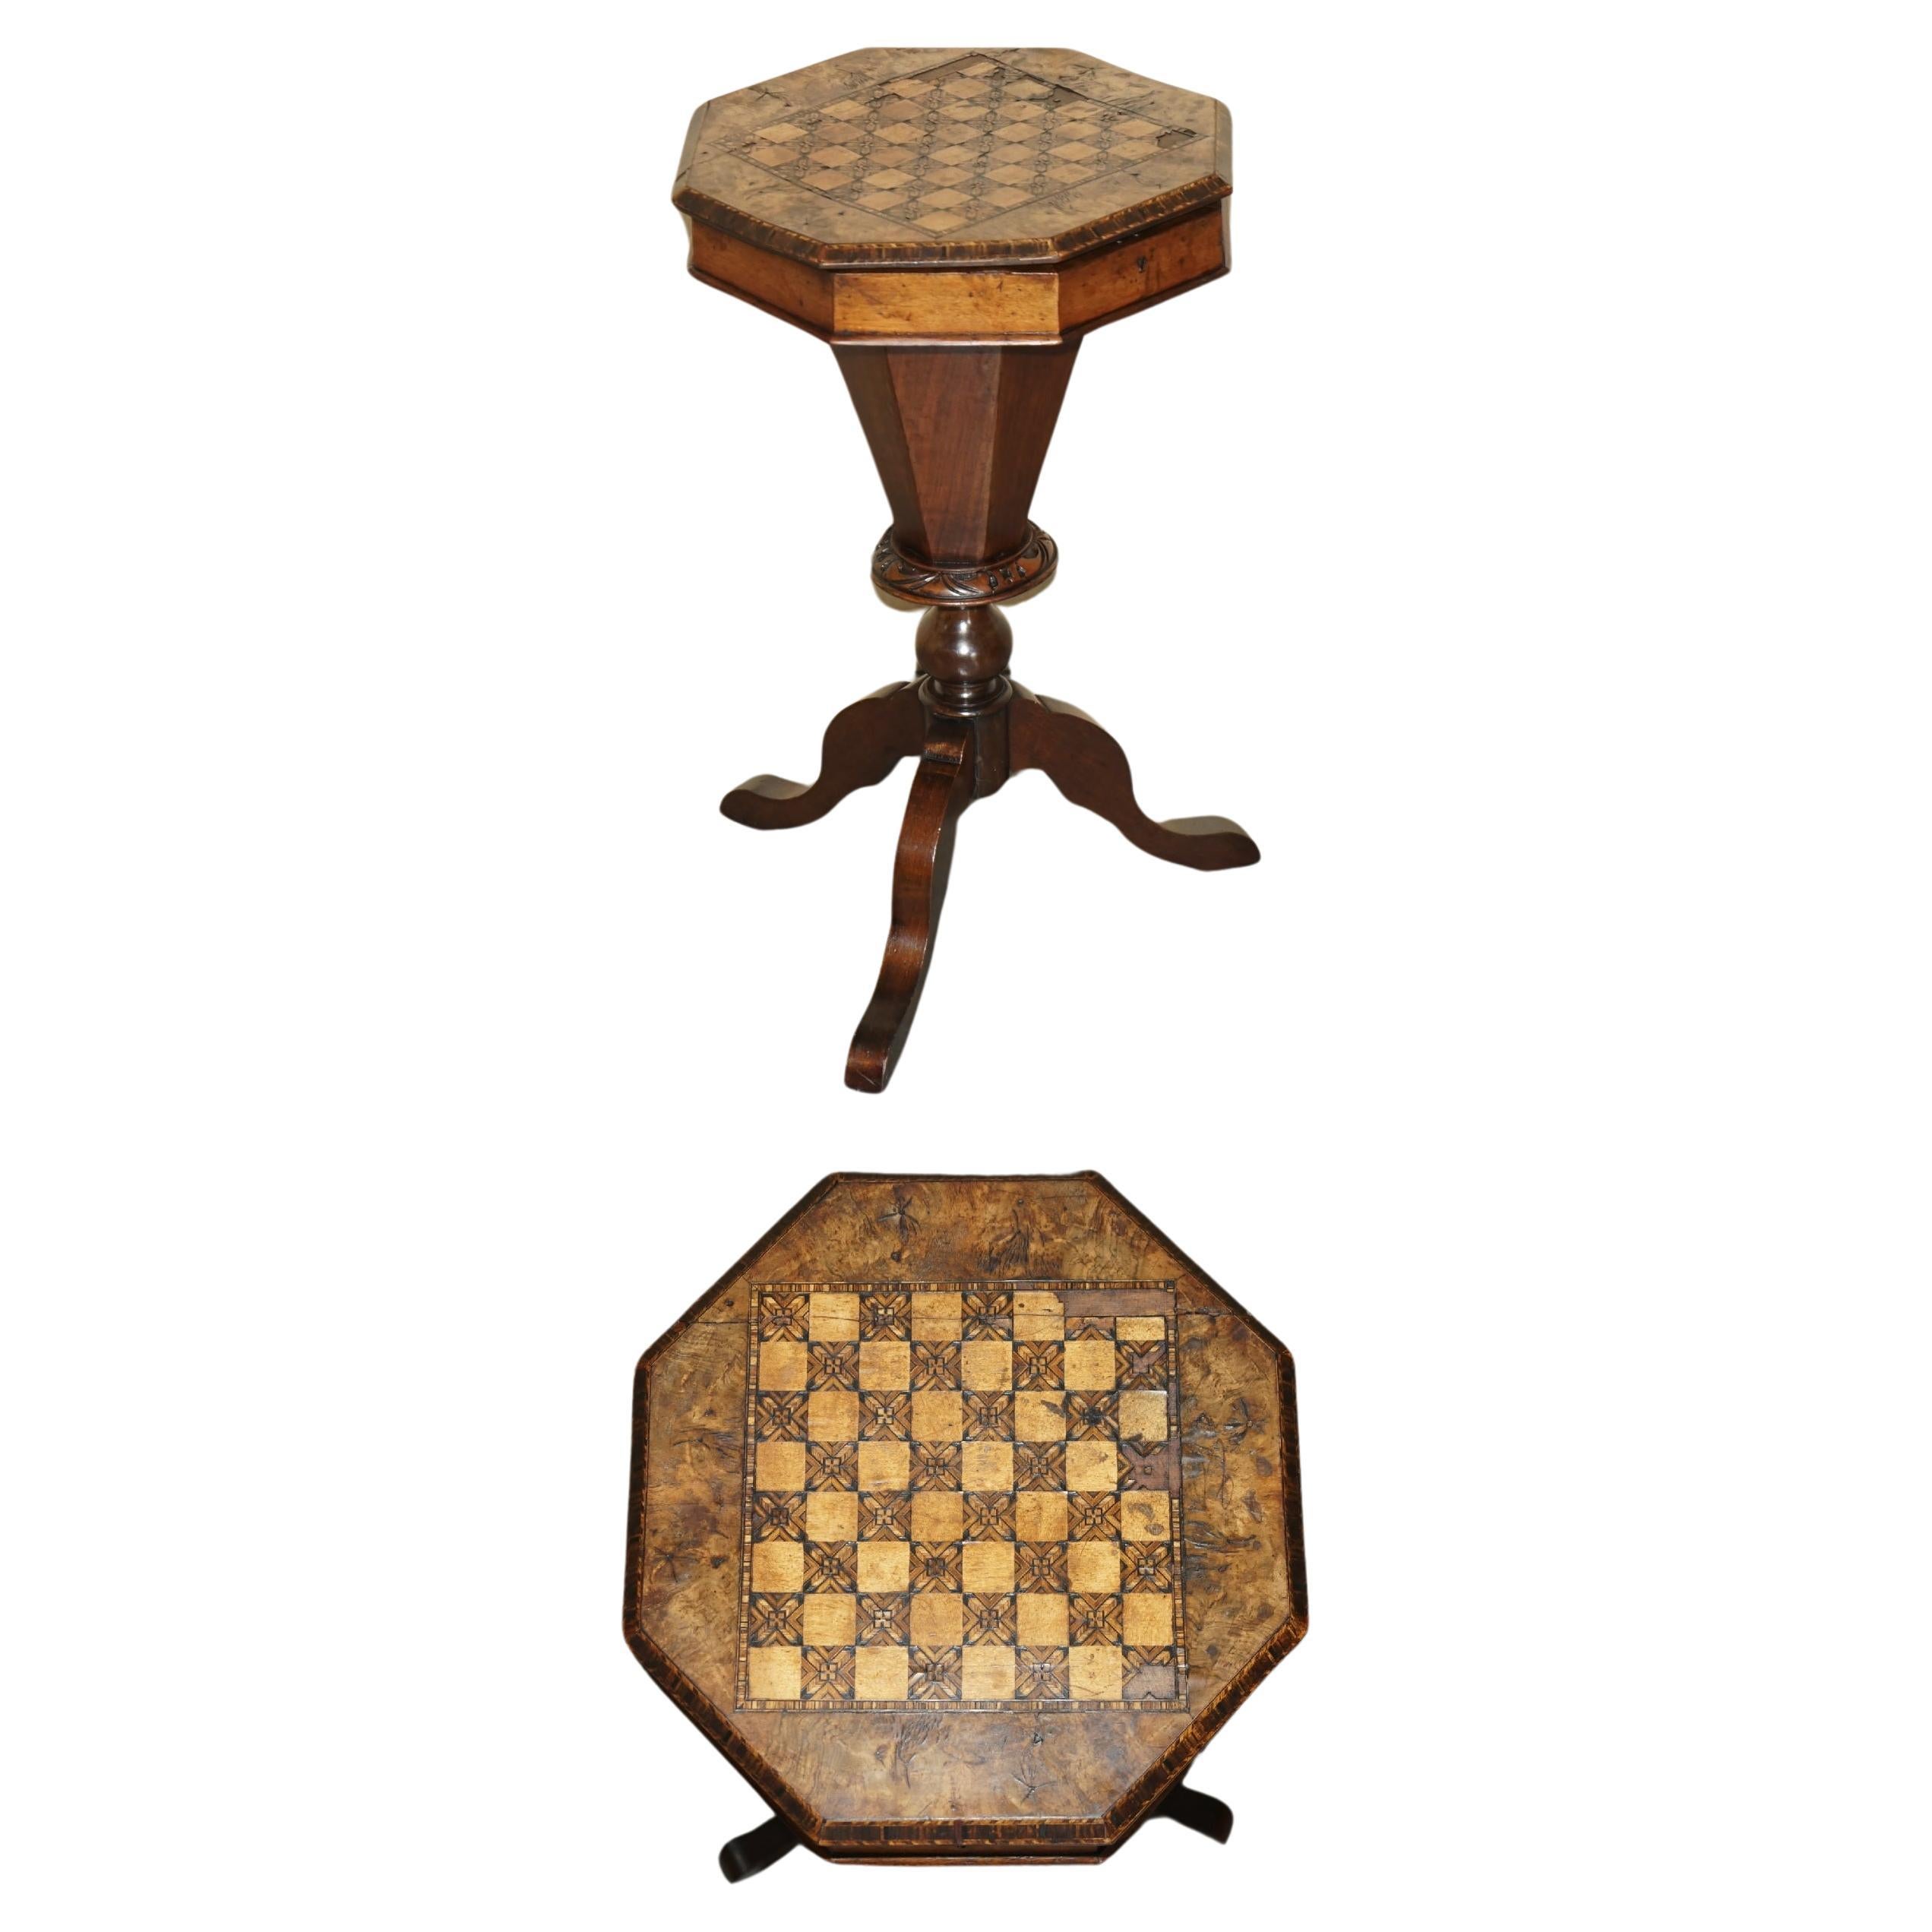 DISTRESSED ANTIQUE BURR WALNUT & HARDWOOD SEWiNG WORK TABLE CHESS BOARD TOP For Sale